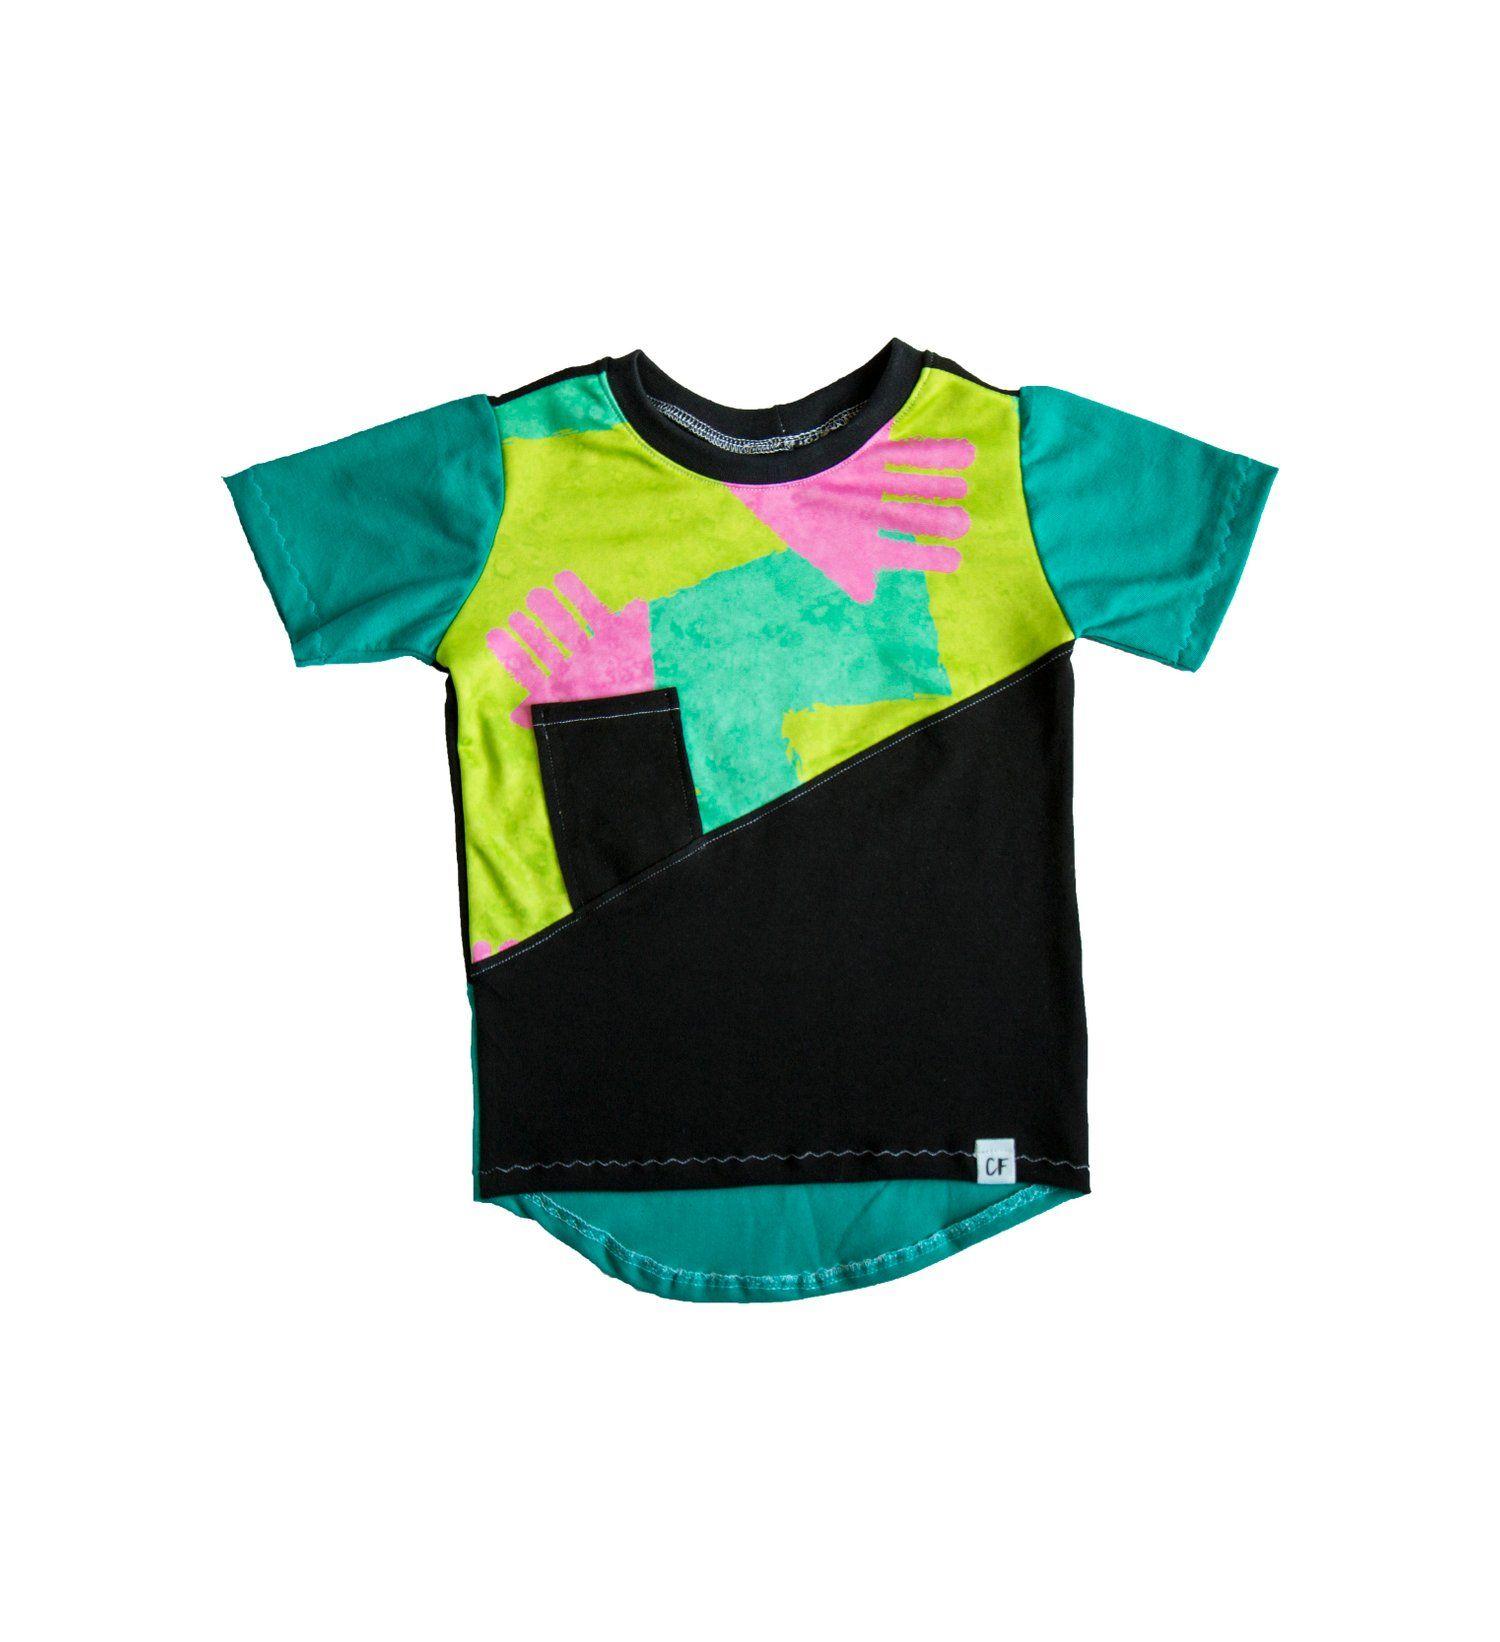 Clothing and Apparel NB Logo - Neon Graffiti Hi Low Sideways Tee By Cheeky Face Apparel. A Super